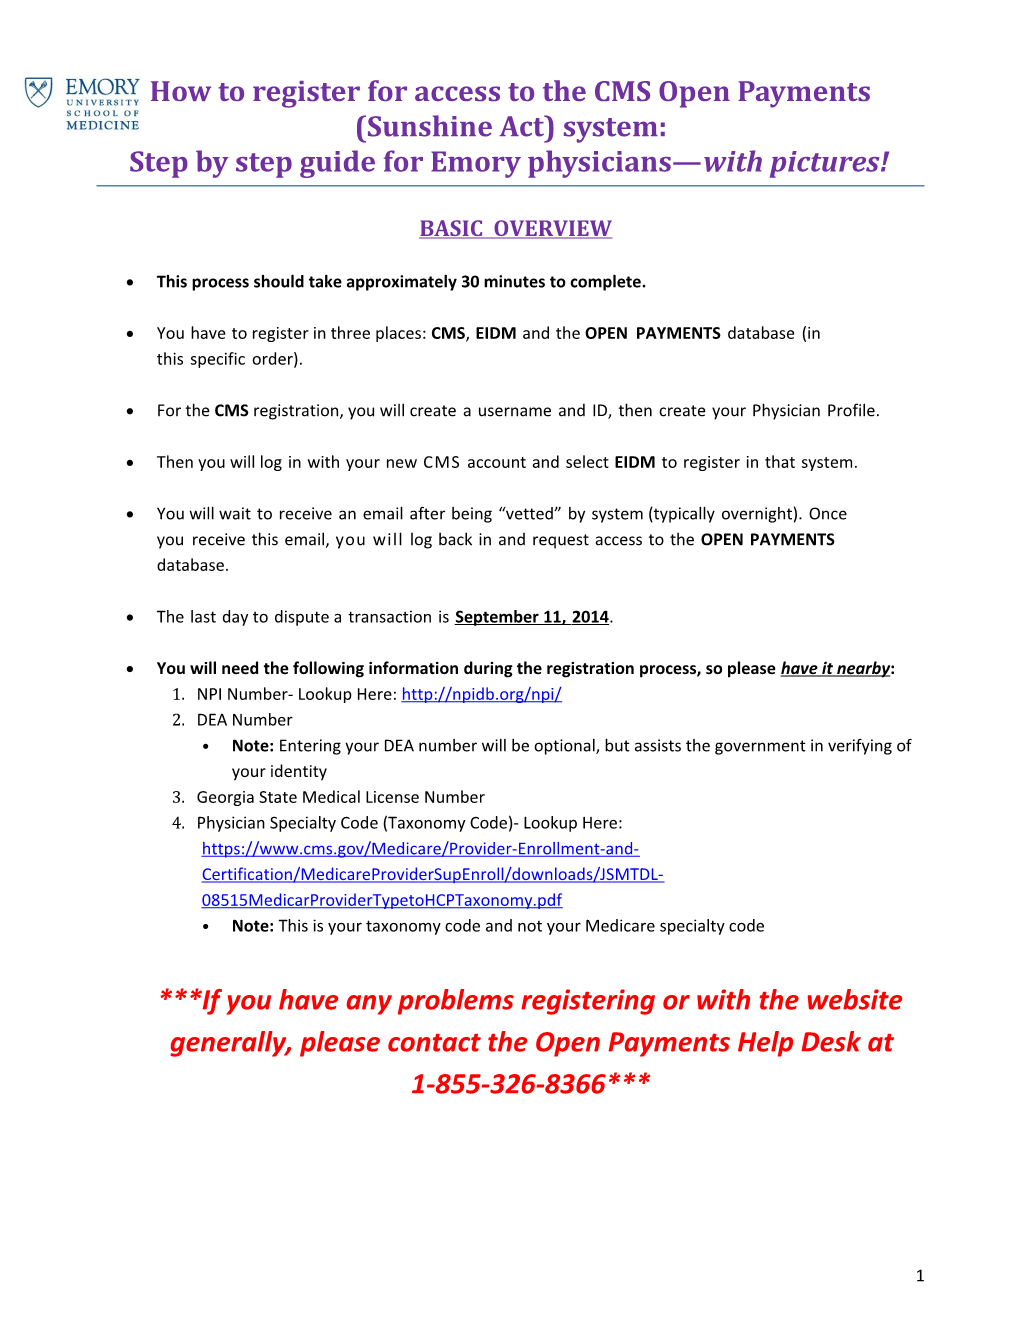 Step by Step Guide for Emory Physicians with Pictures!